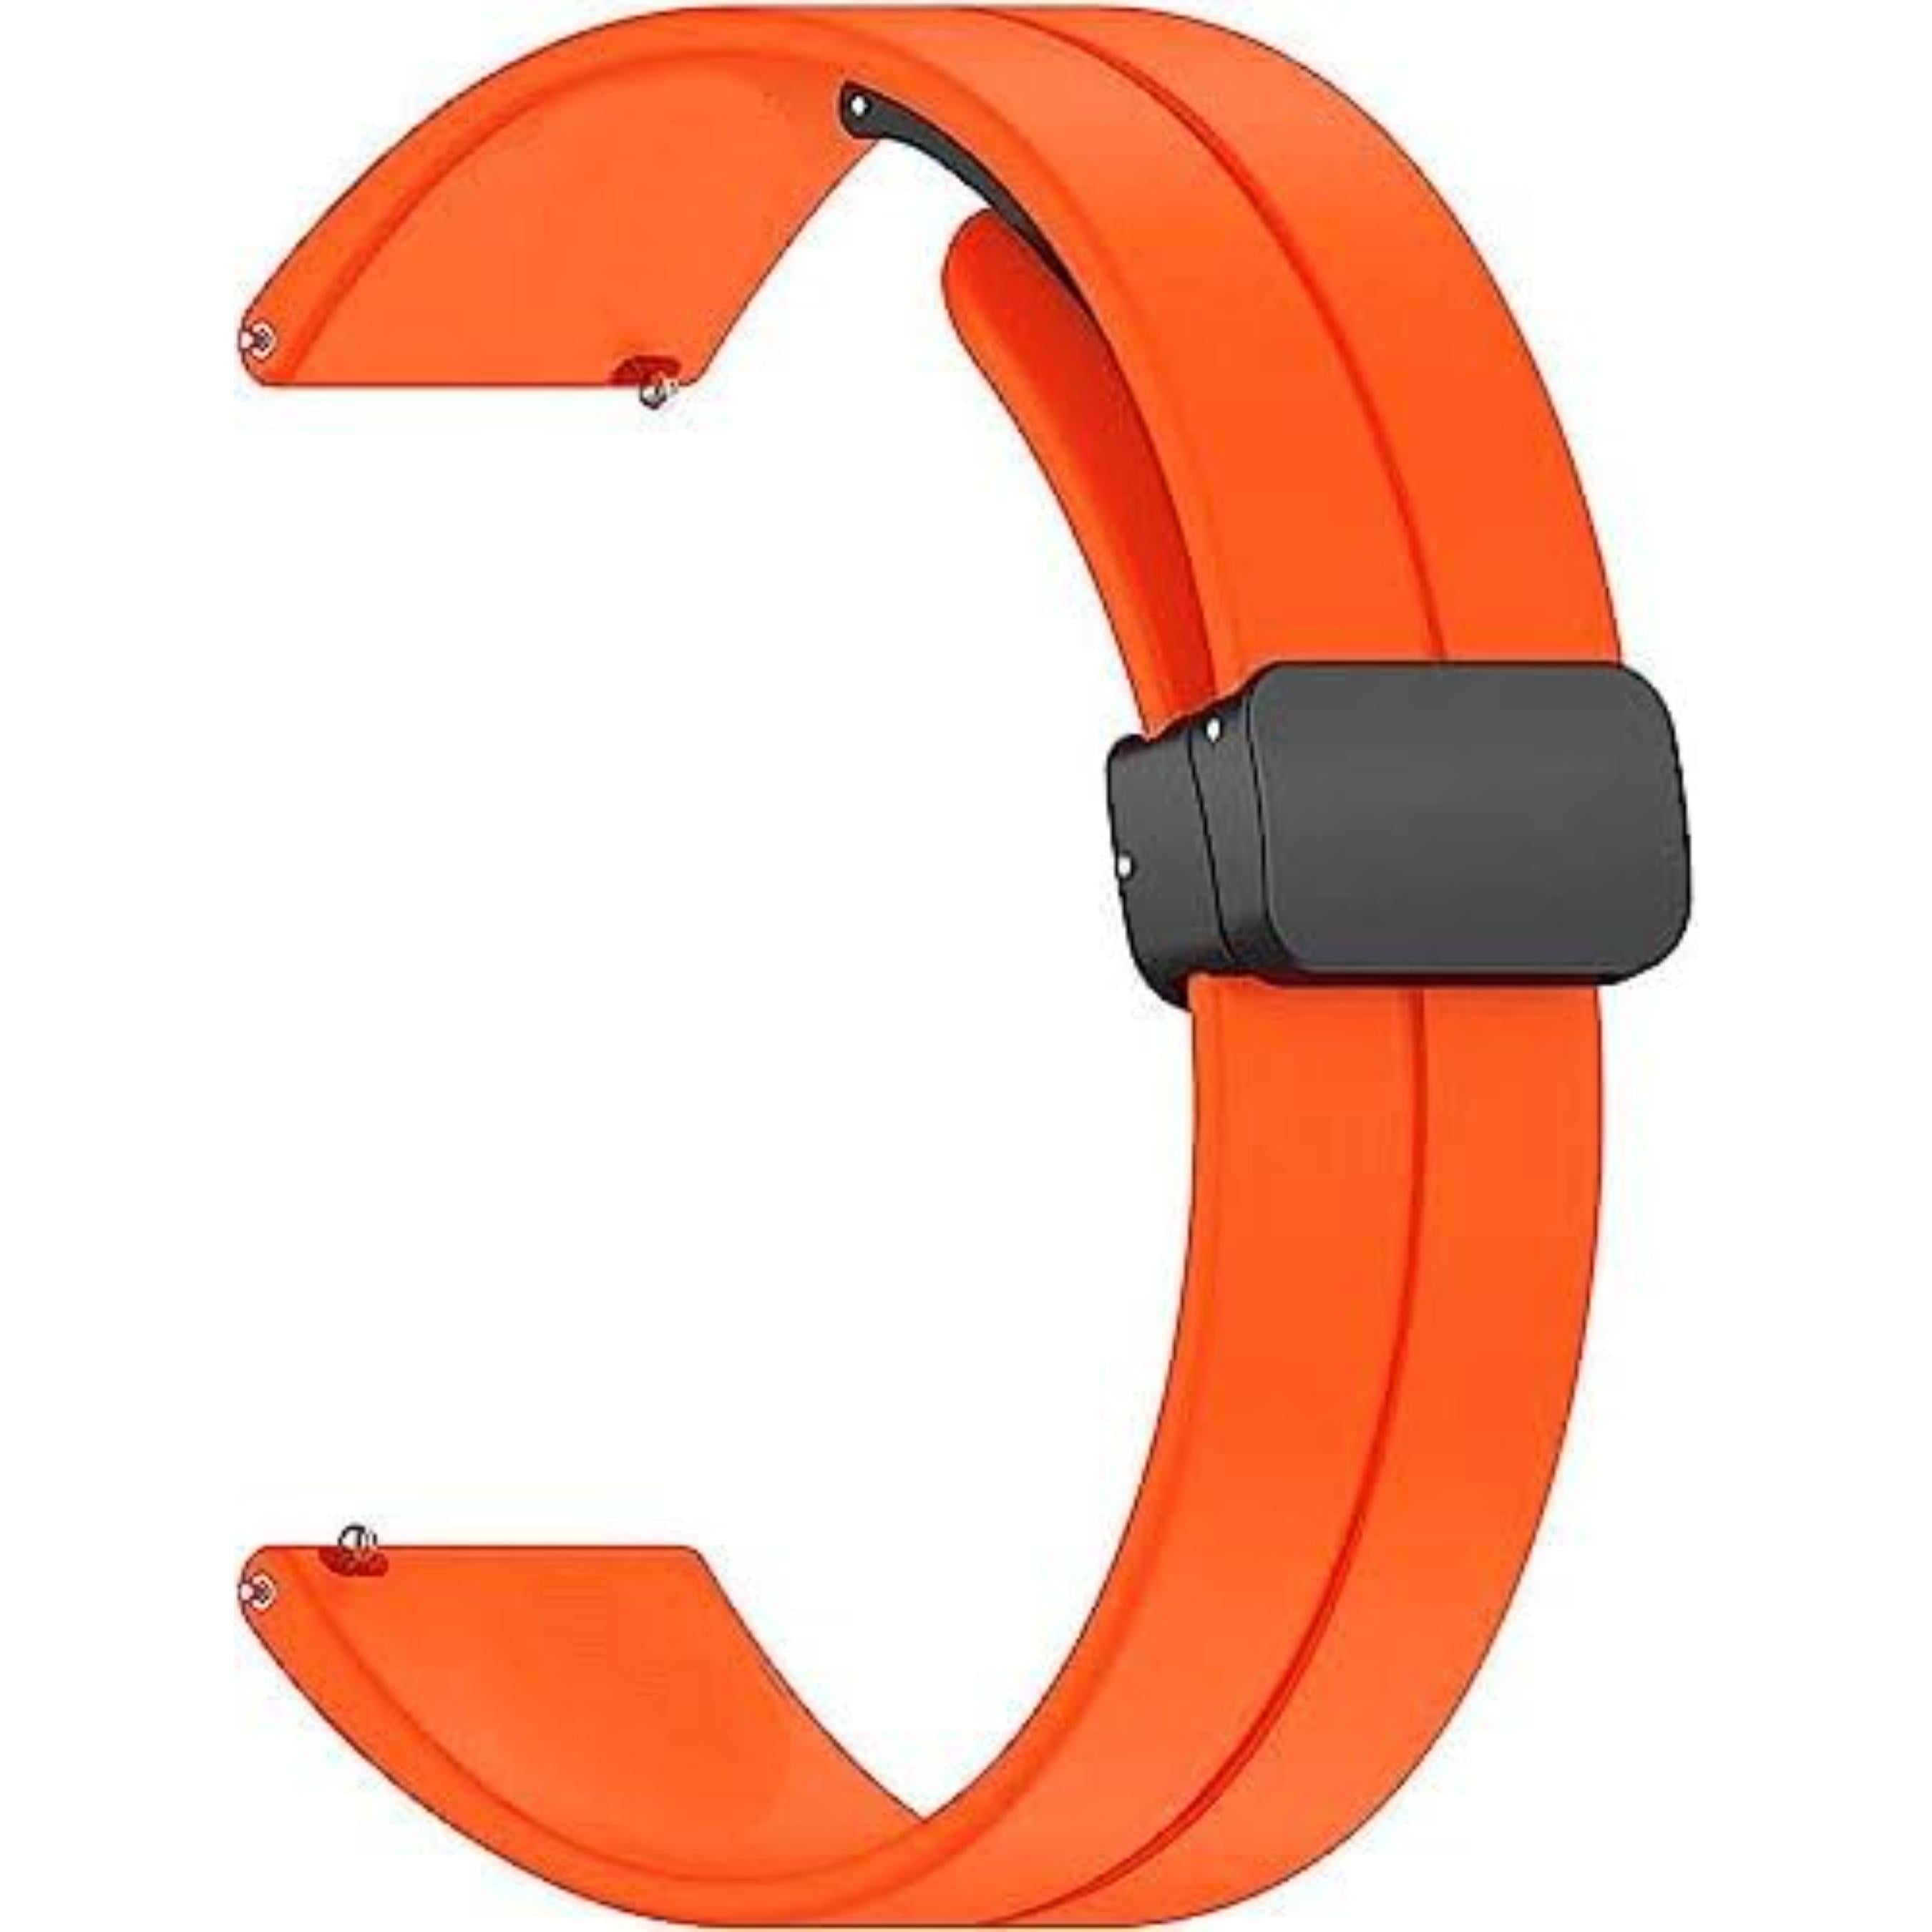 Lorenz Silicone 22mm Replacement Watch Strap with Adjustable Magnetic Lock Feature Compatible with Boat Xtend, Boat Xtend Pro, Noise & all other 22MM Watches (Orange)